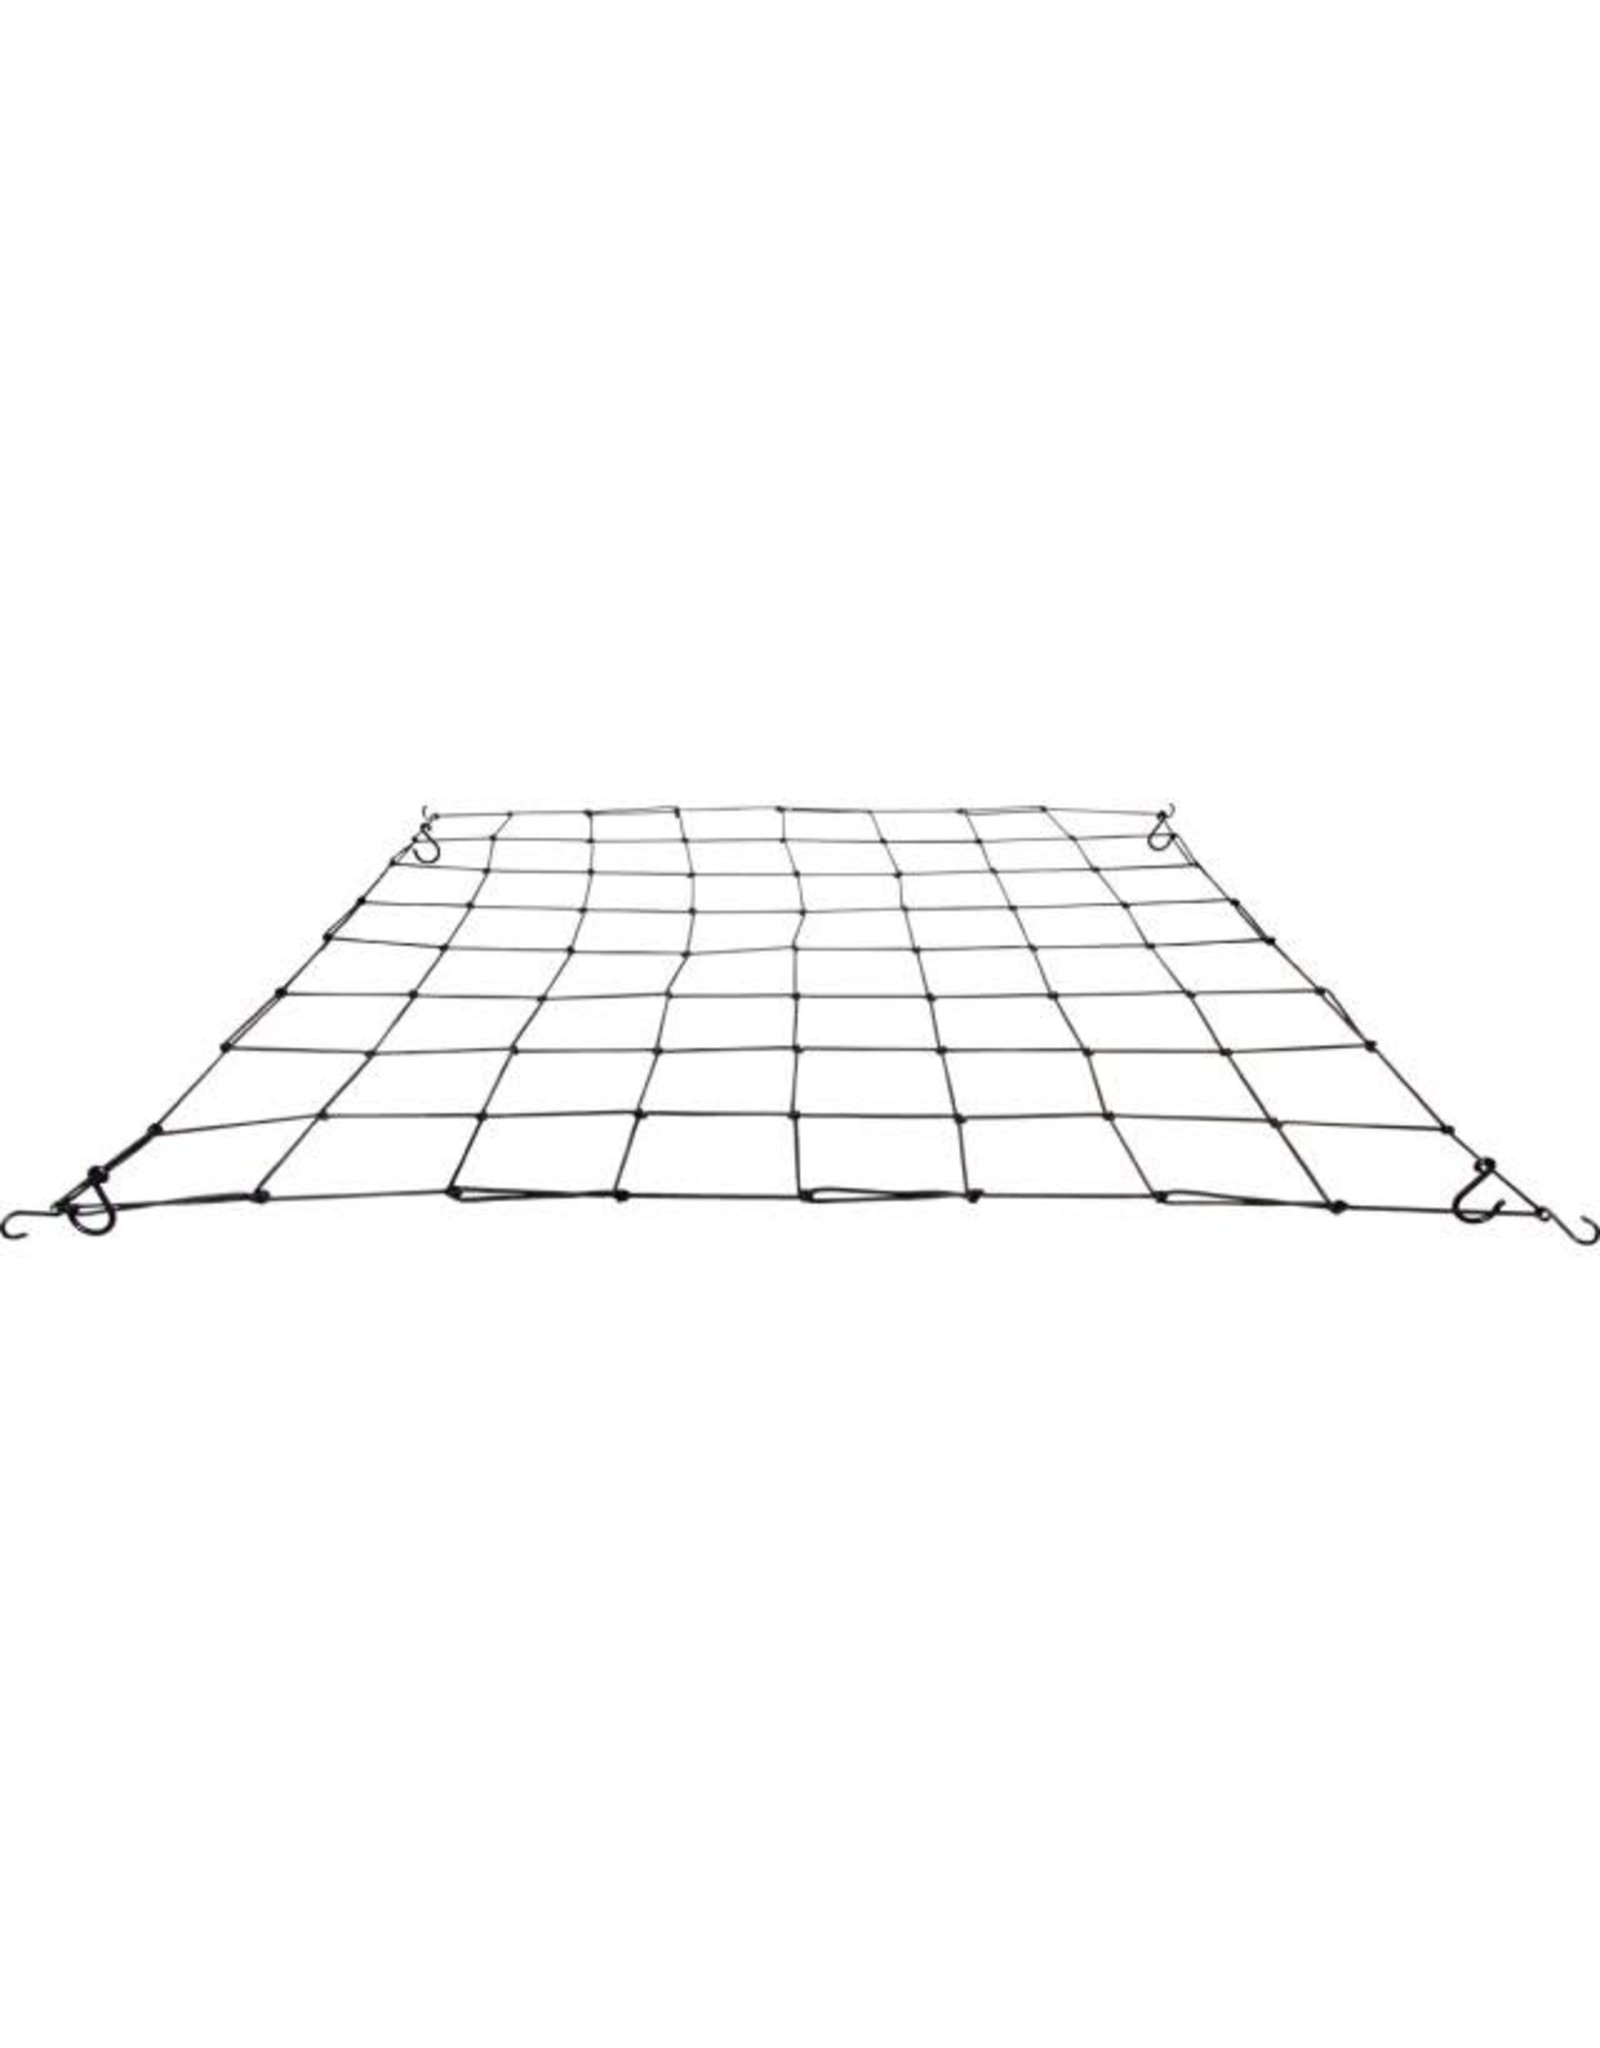 Hydrofarm Pronet Trellis for tents from 2' to 5'